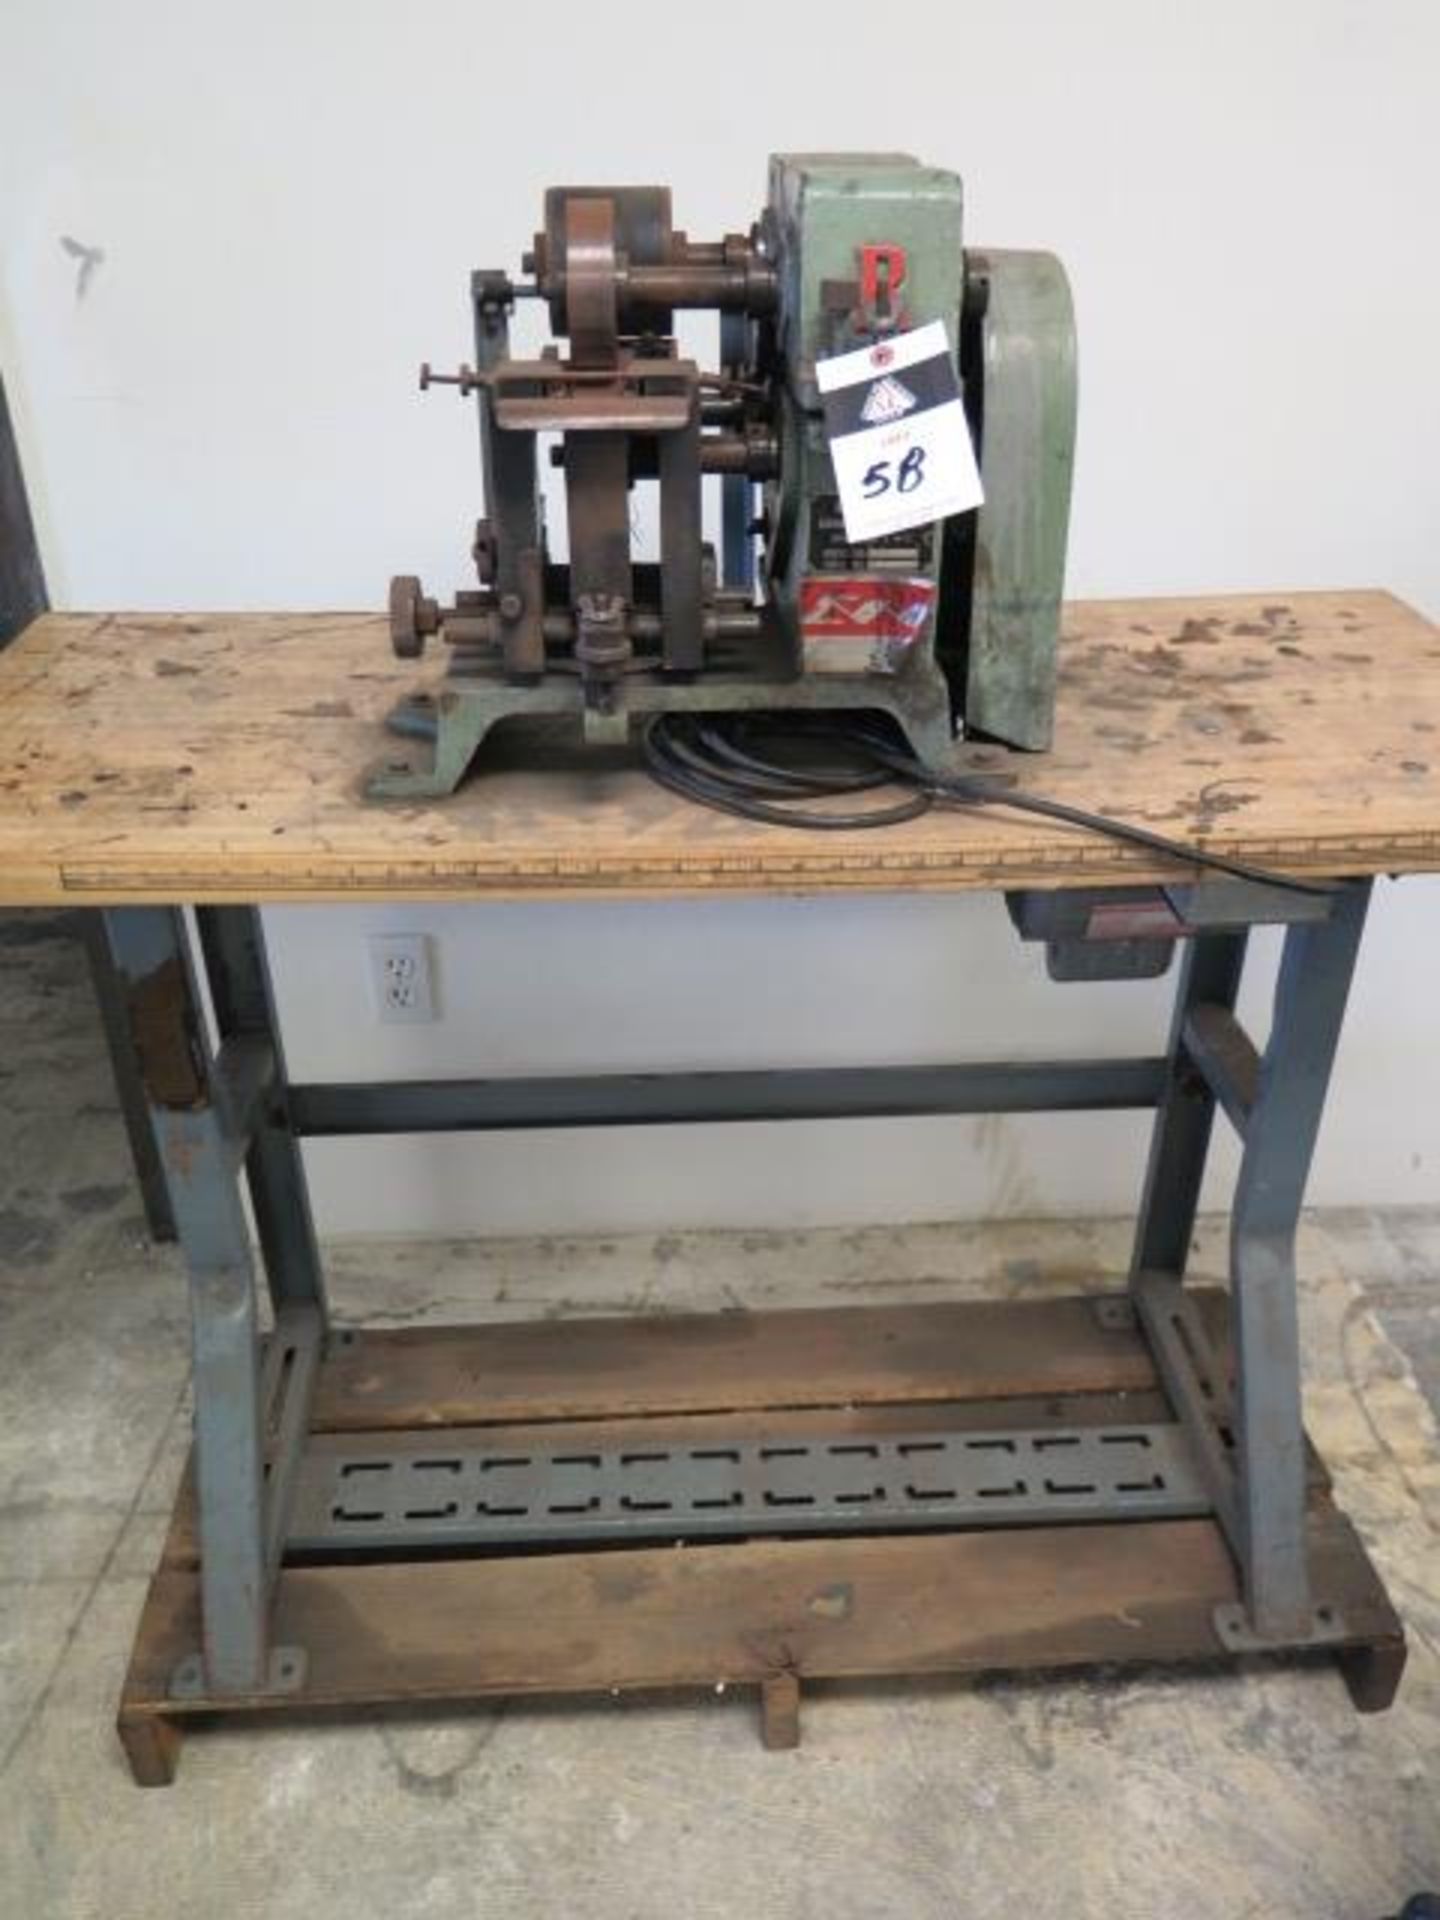 Randall NSB Leather Belt Beveling Machine s/n P6899 (SOLD AS-IS - NO WARRANTY)